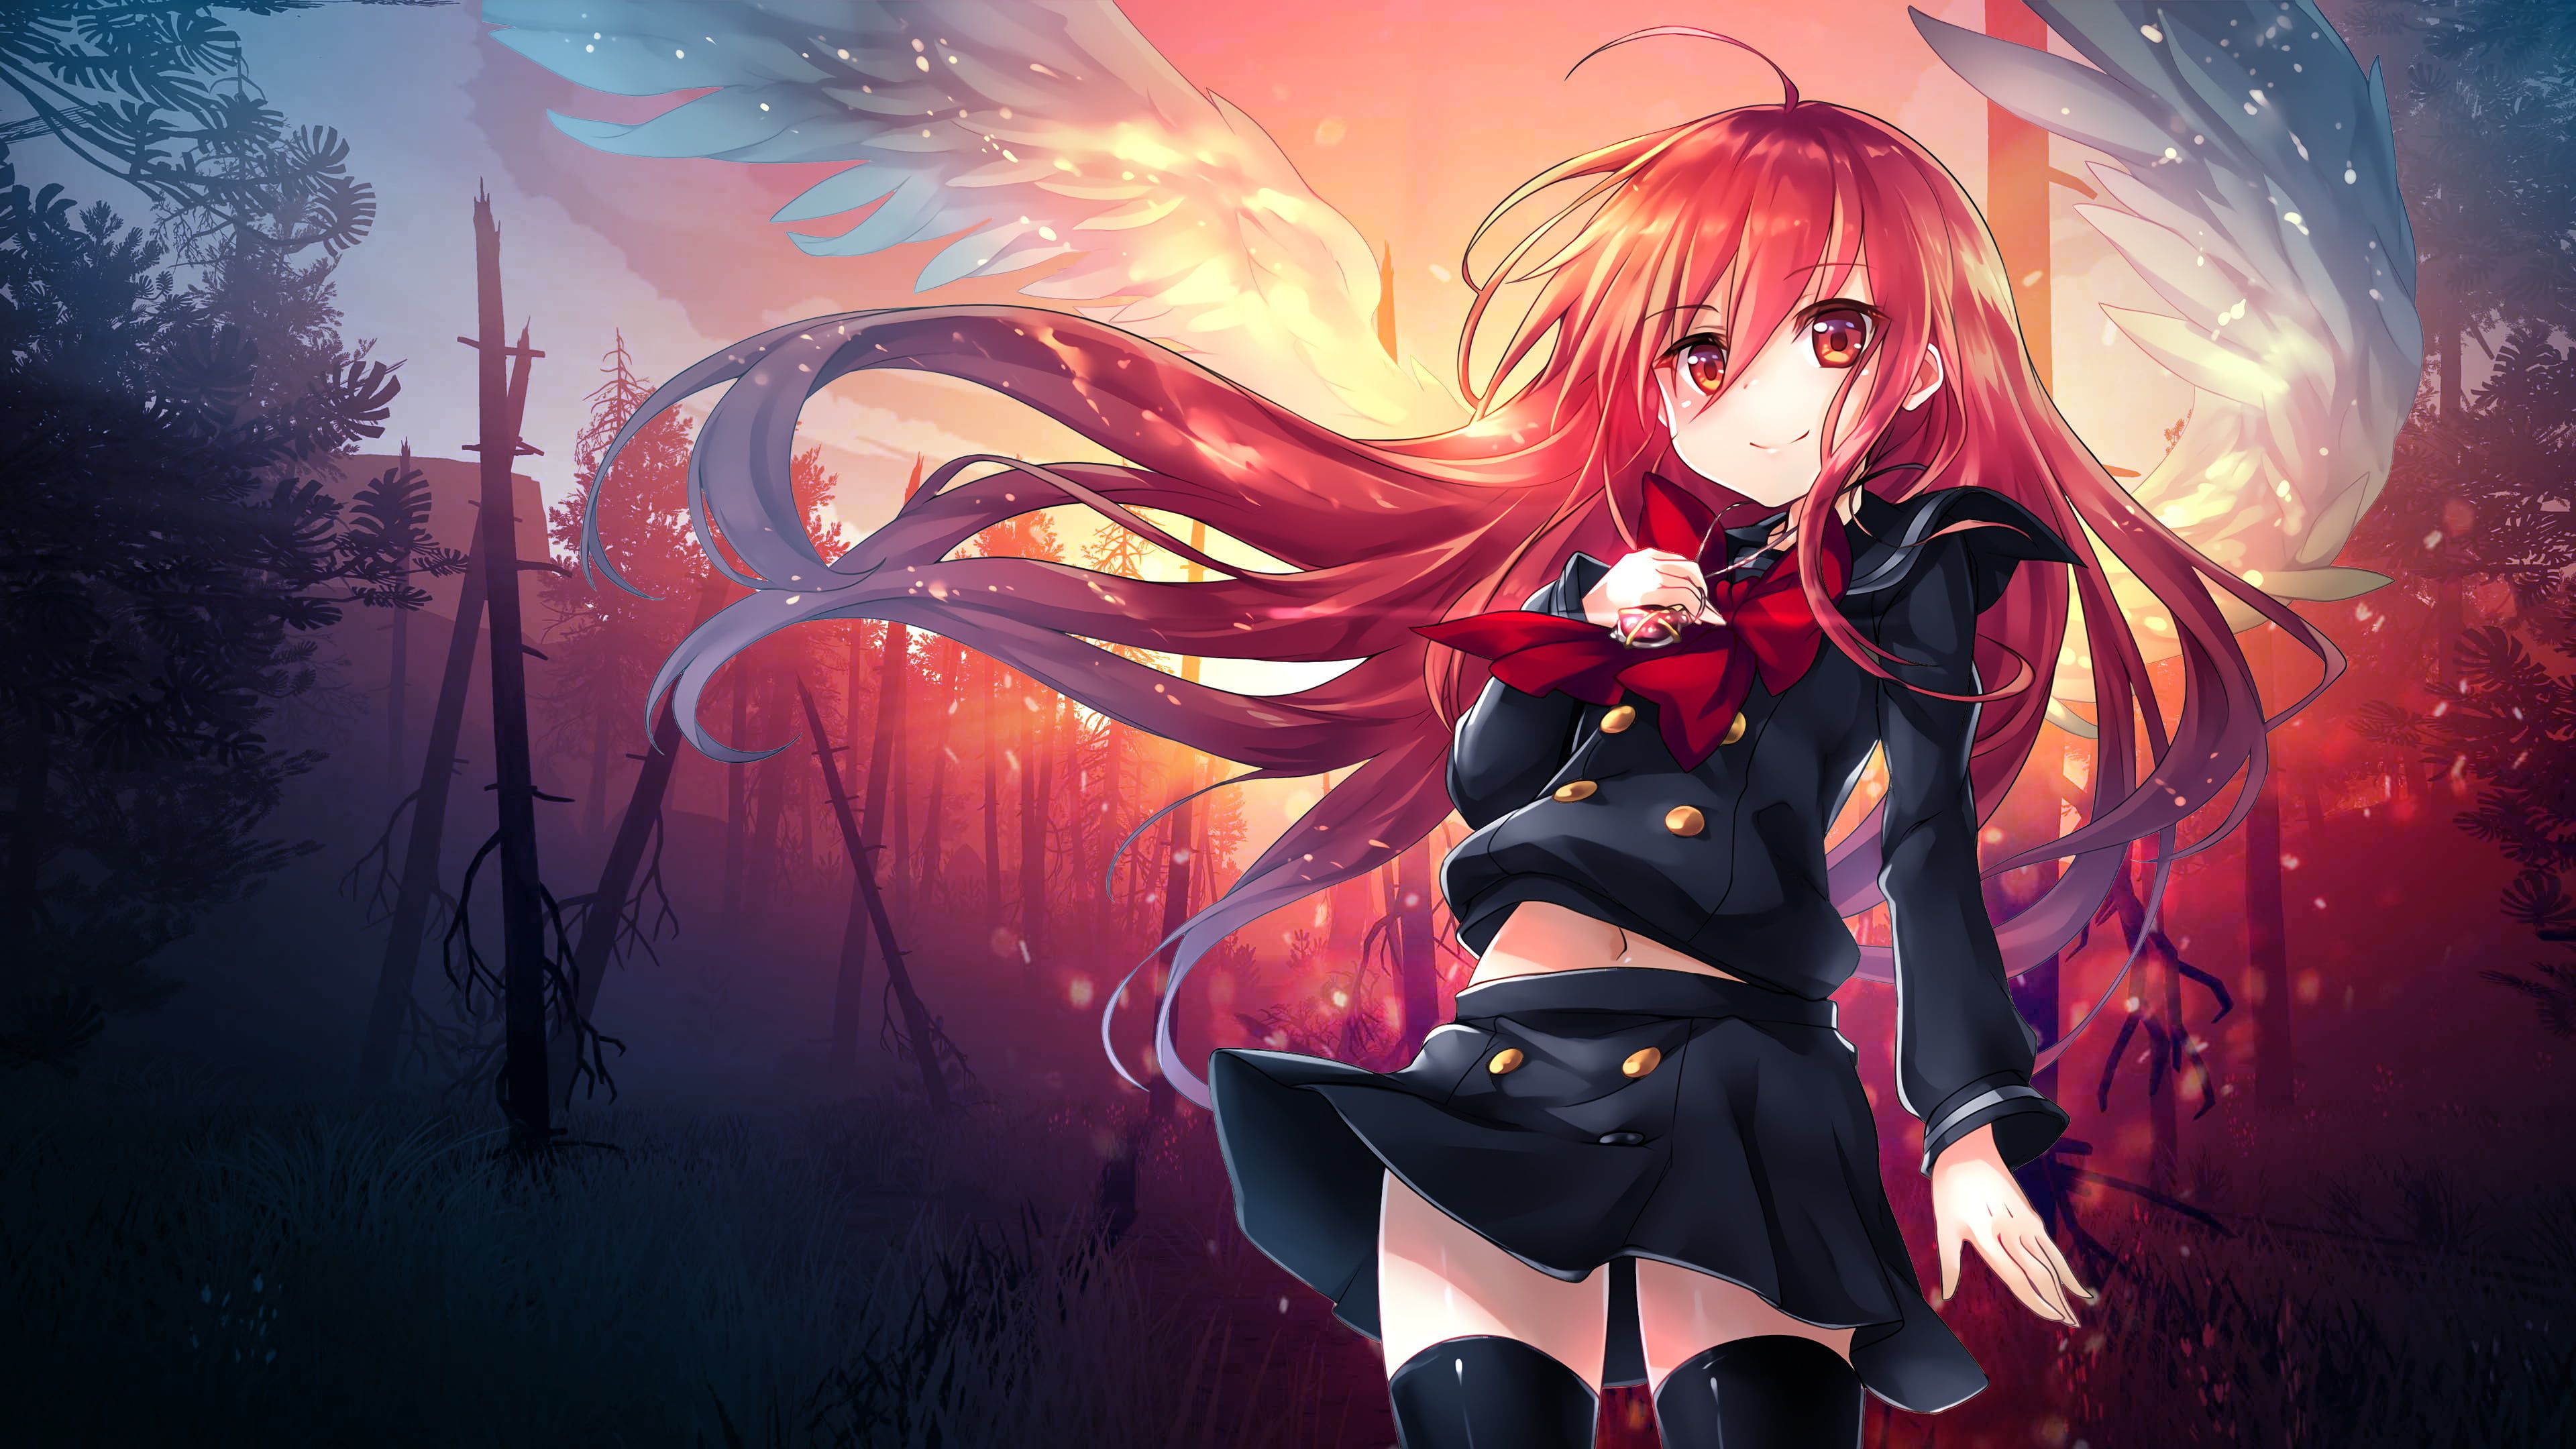 6,924 Red Haired Girl Anime Images, Stock Photos & Vectors | Shutterstock